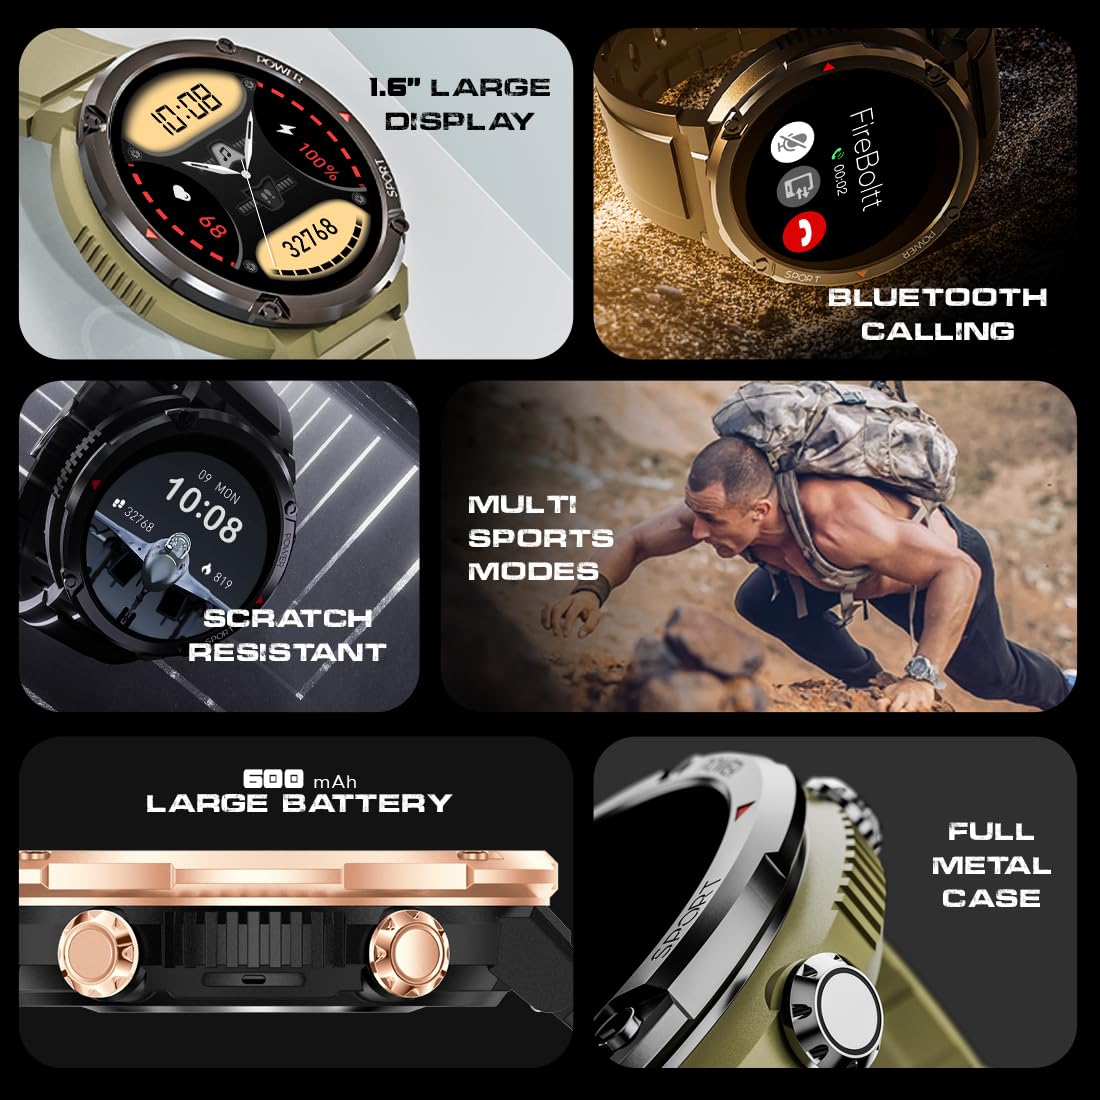 Fire-Boltt Armour, Sporty Rugged Outdoor Smart Watch with a 1.6